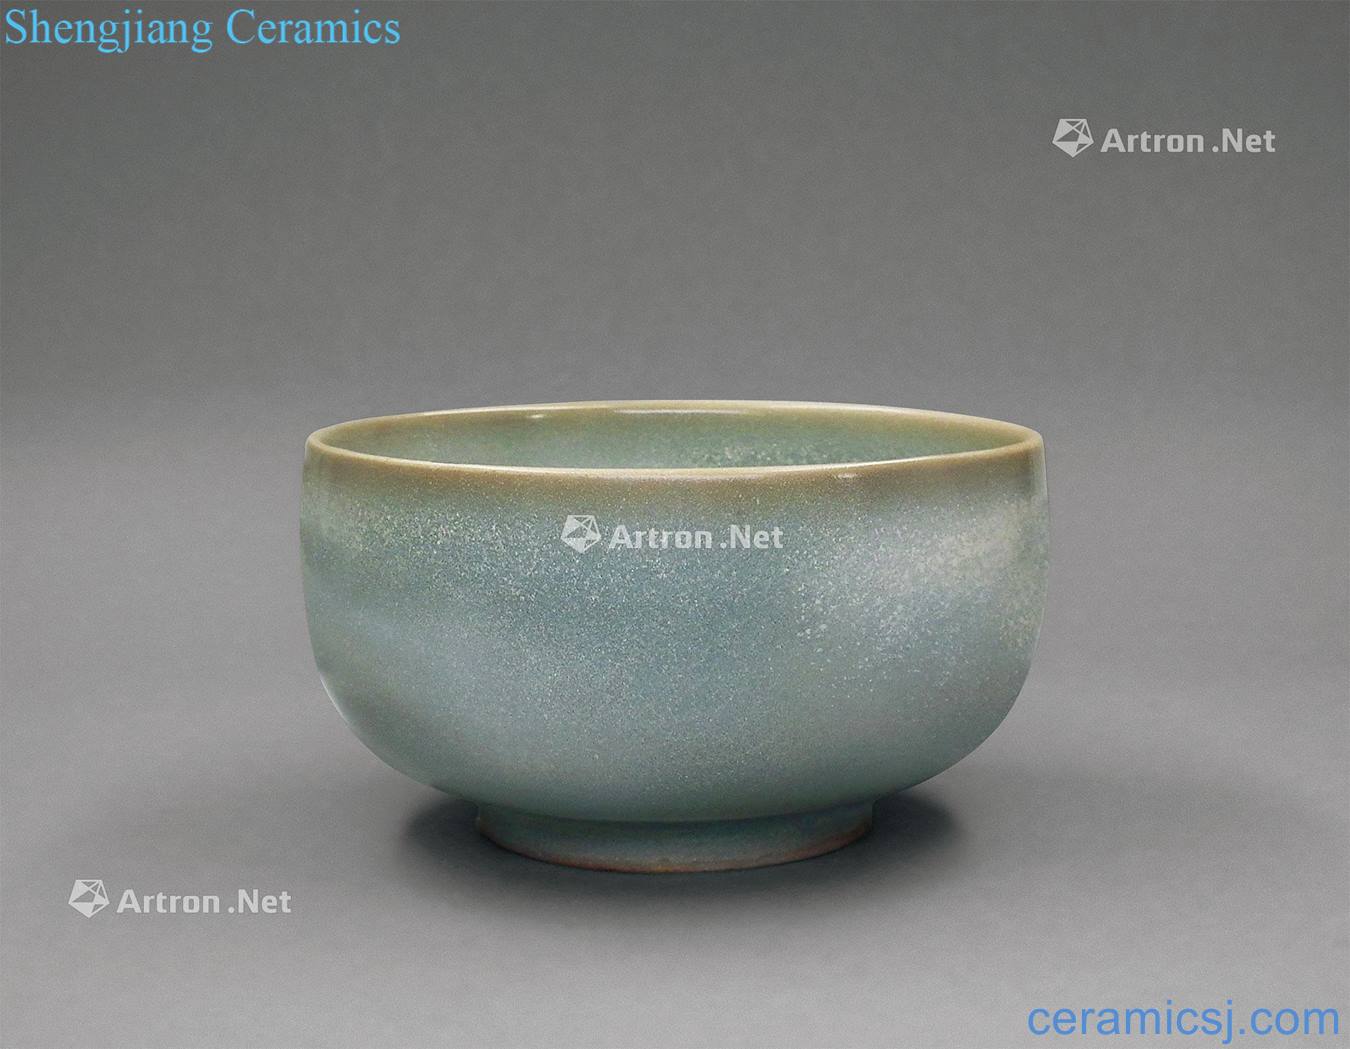 The song dynasty Ocean's pa blue glaze bowls